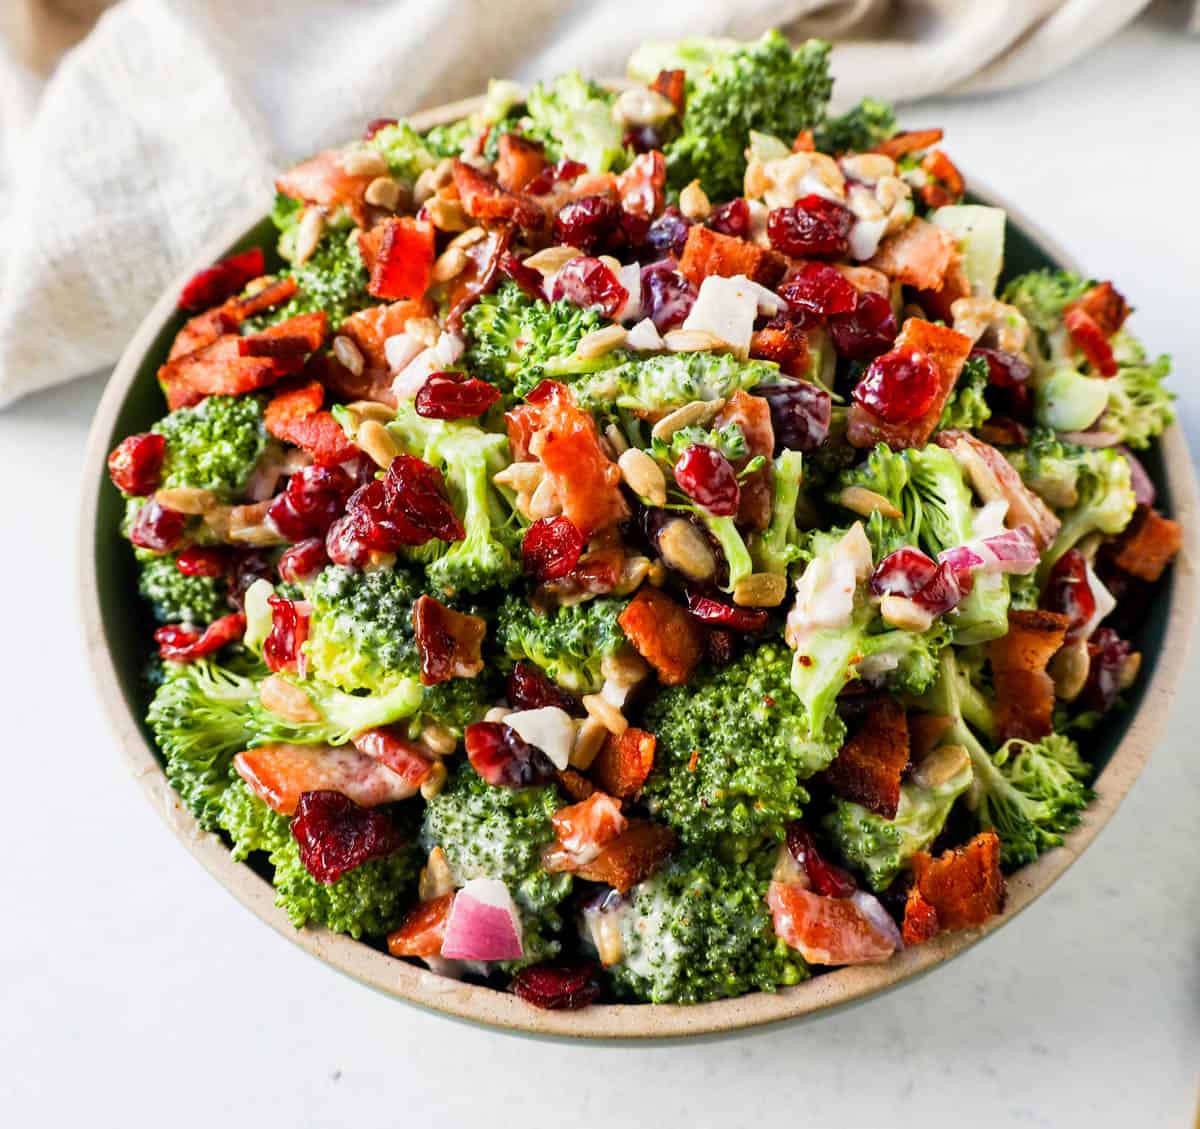 A bowl of homemade broccoli salad. Crunchy, easy broccoli salad with crispy bacon, sweet dried cranberries, onion, and nuts all tossed in a sweet and tangy dressing. Tips for making the best broccoli salad. A classic potluck, BBQ, or summer side dish recipe!